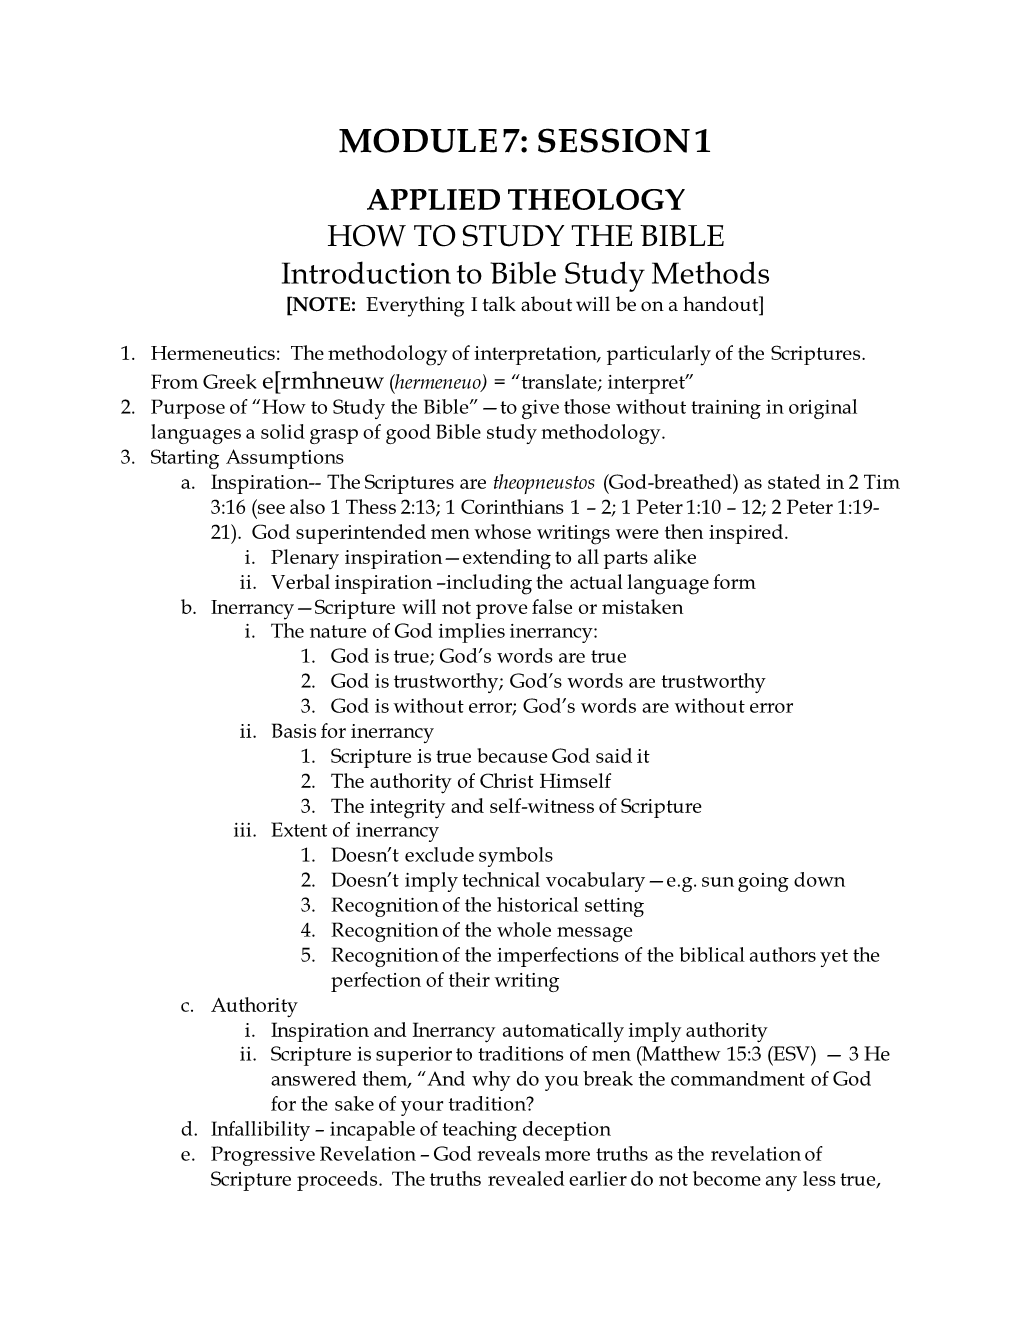 MODULE 7: SESSION 1 APPLIED THEOLOGY HOW to STUDY the BIBLE Introduction to Bible Study Methods [NOTE: Everything I Talk About Will Be on a Handout]